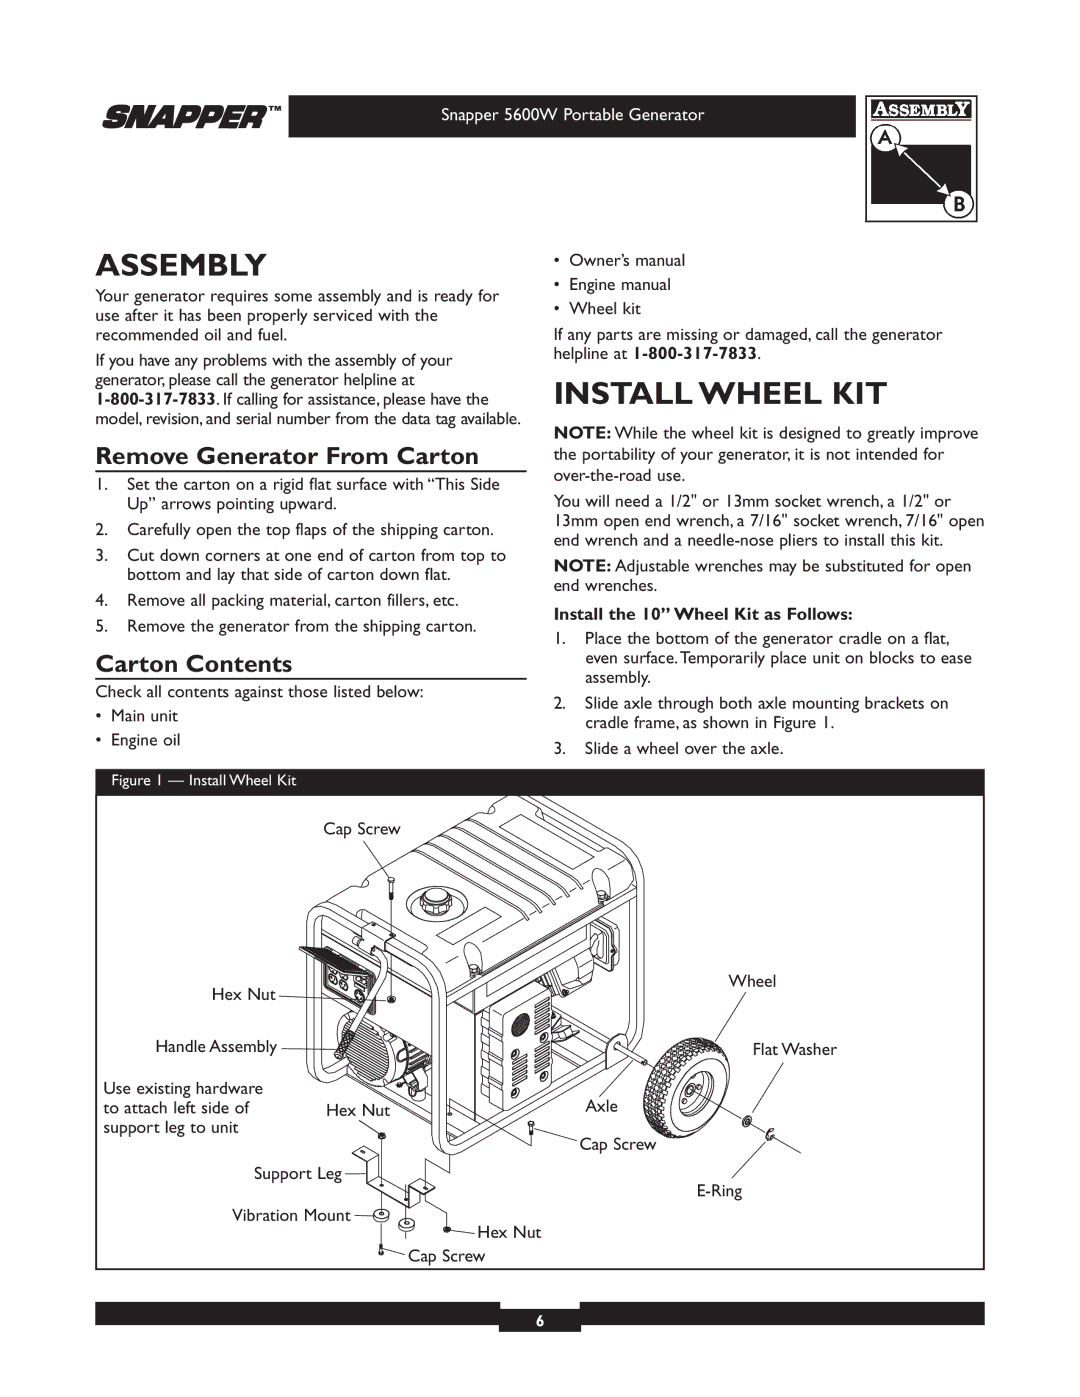 Snapper 30215 owner manual Assembly, Install Wheel KIT, Remove Generator From Carton, Carton Contents 